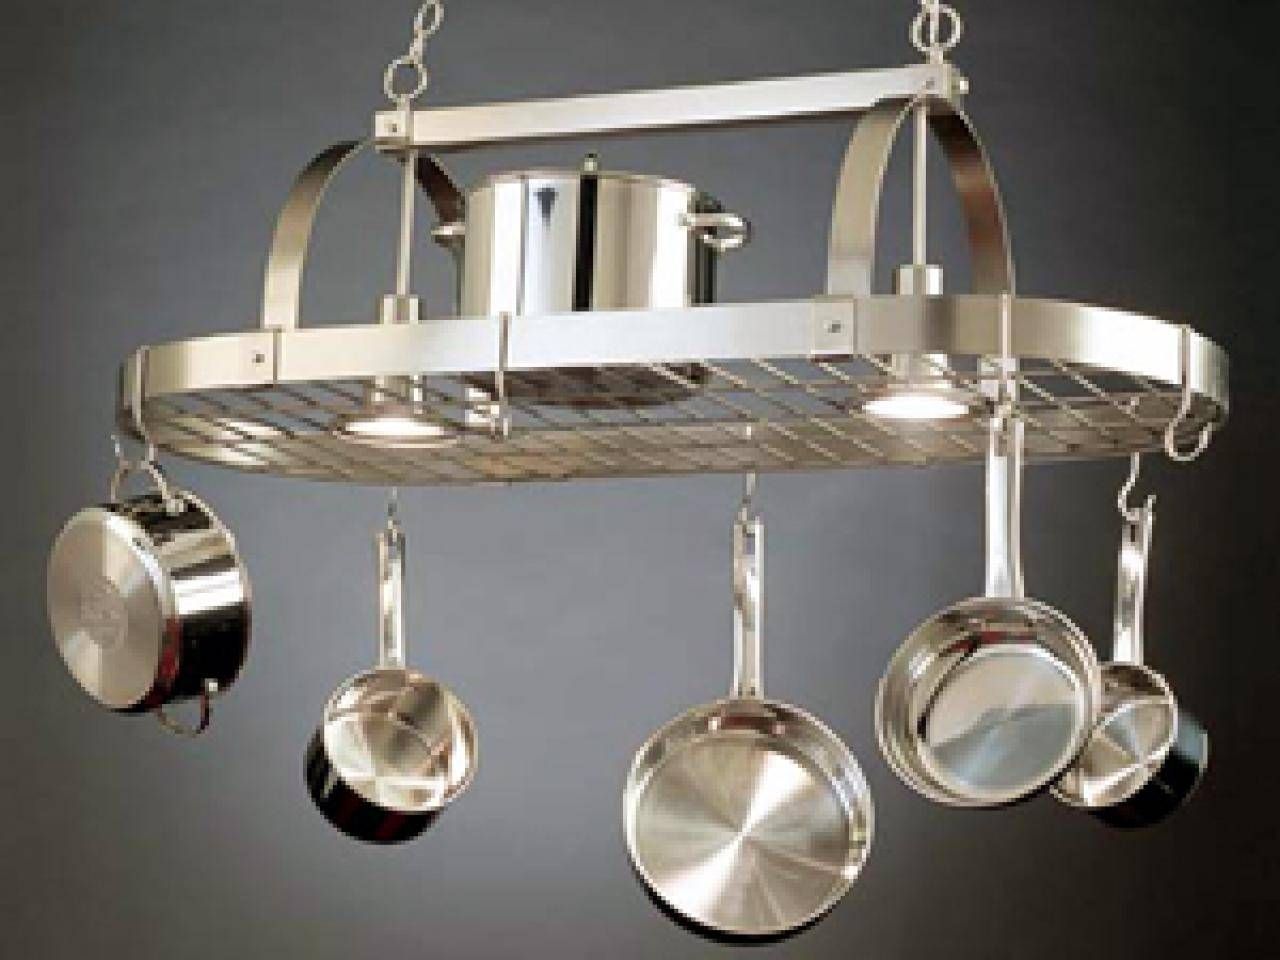 A Pot Rack In Its Proper Place | Hgtv Within Pot Rack Pendant Lights (Photo 1 of 15)